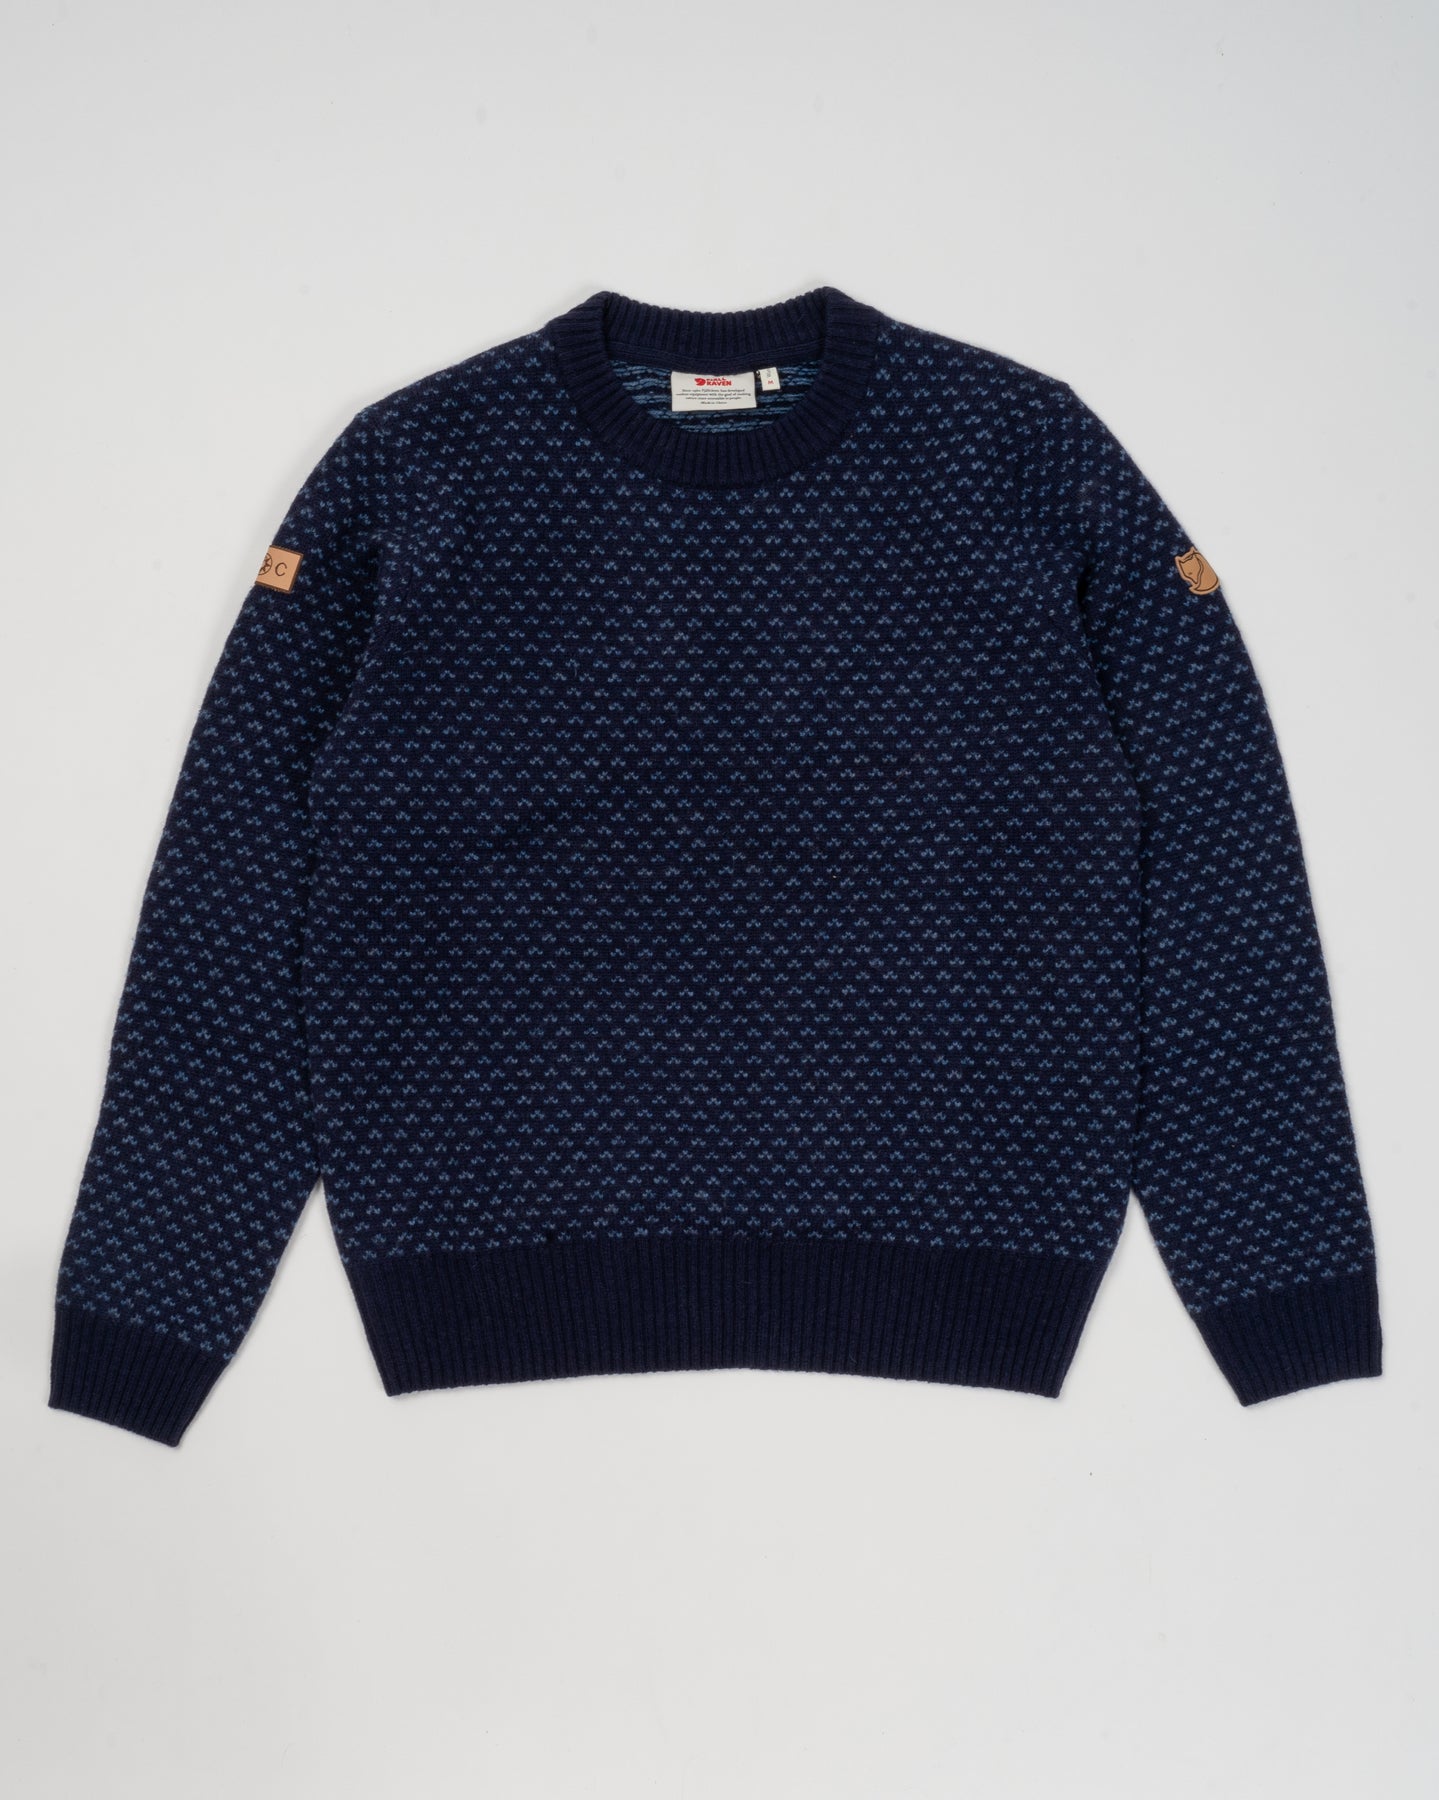 Louis Vuitton Woven Astronaut Sweater - Grey Sweaters, Clothing